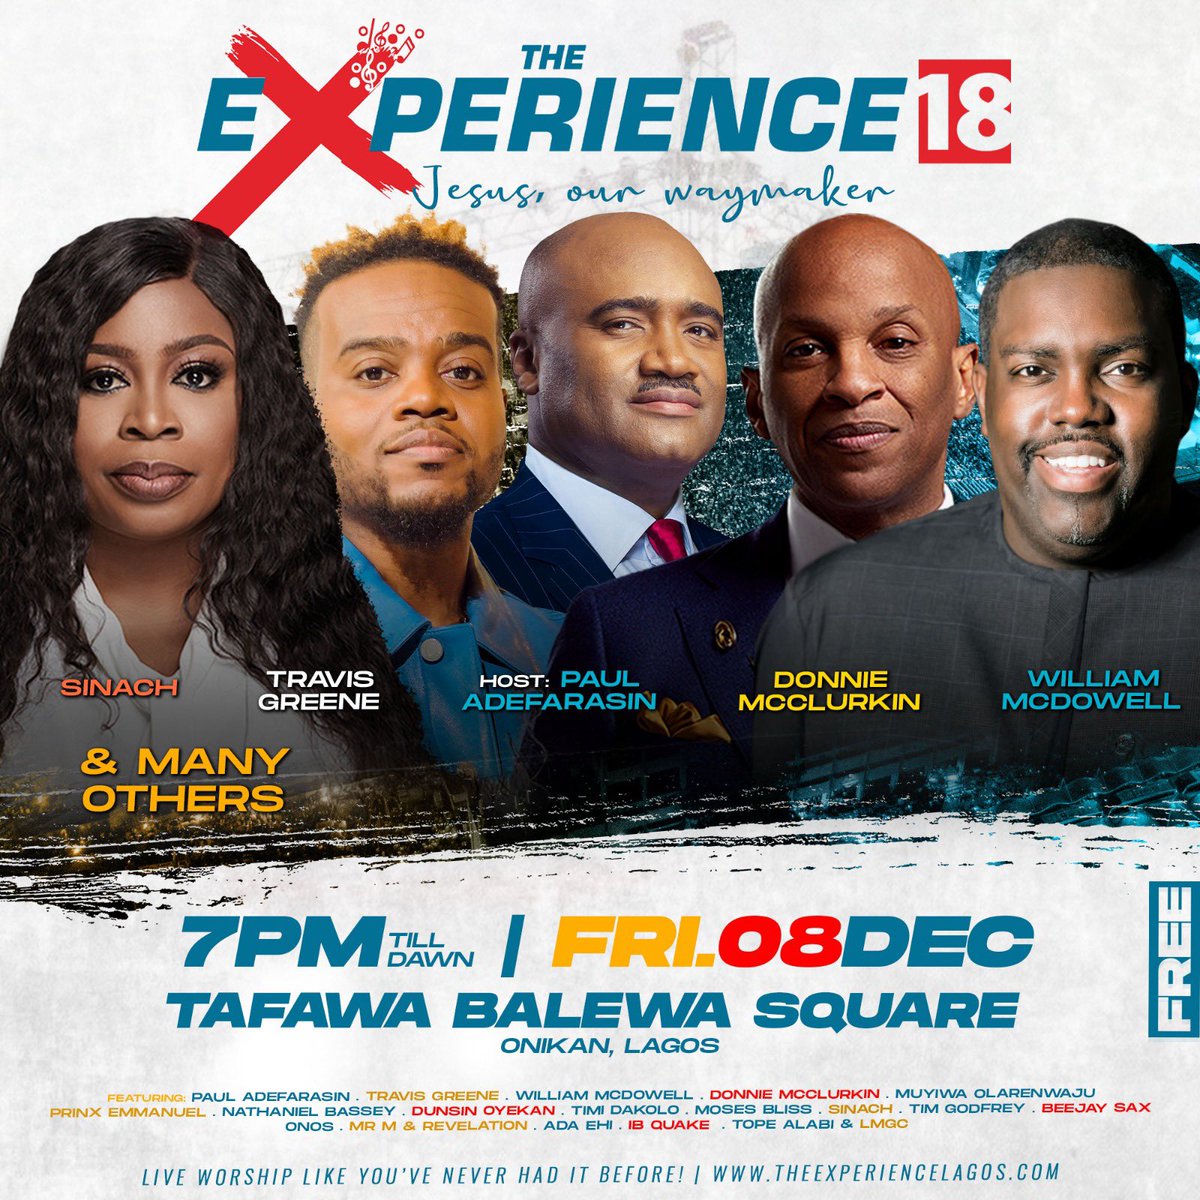 Christ made a way in the wilderness, He walked upon the sea. He parted the red sea for the Isrealites to pass through, He is Jesus, Our Way Maker! Prepare to worship Him this December at #TheExperience. Don't be told, be there! #TE18 #JesusOurWayMaker